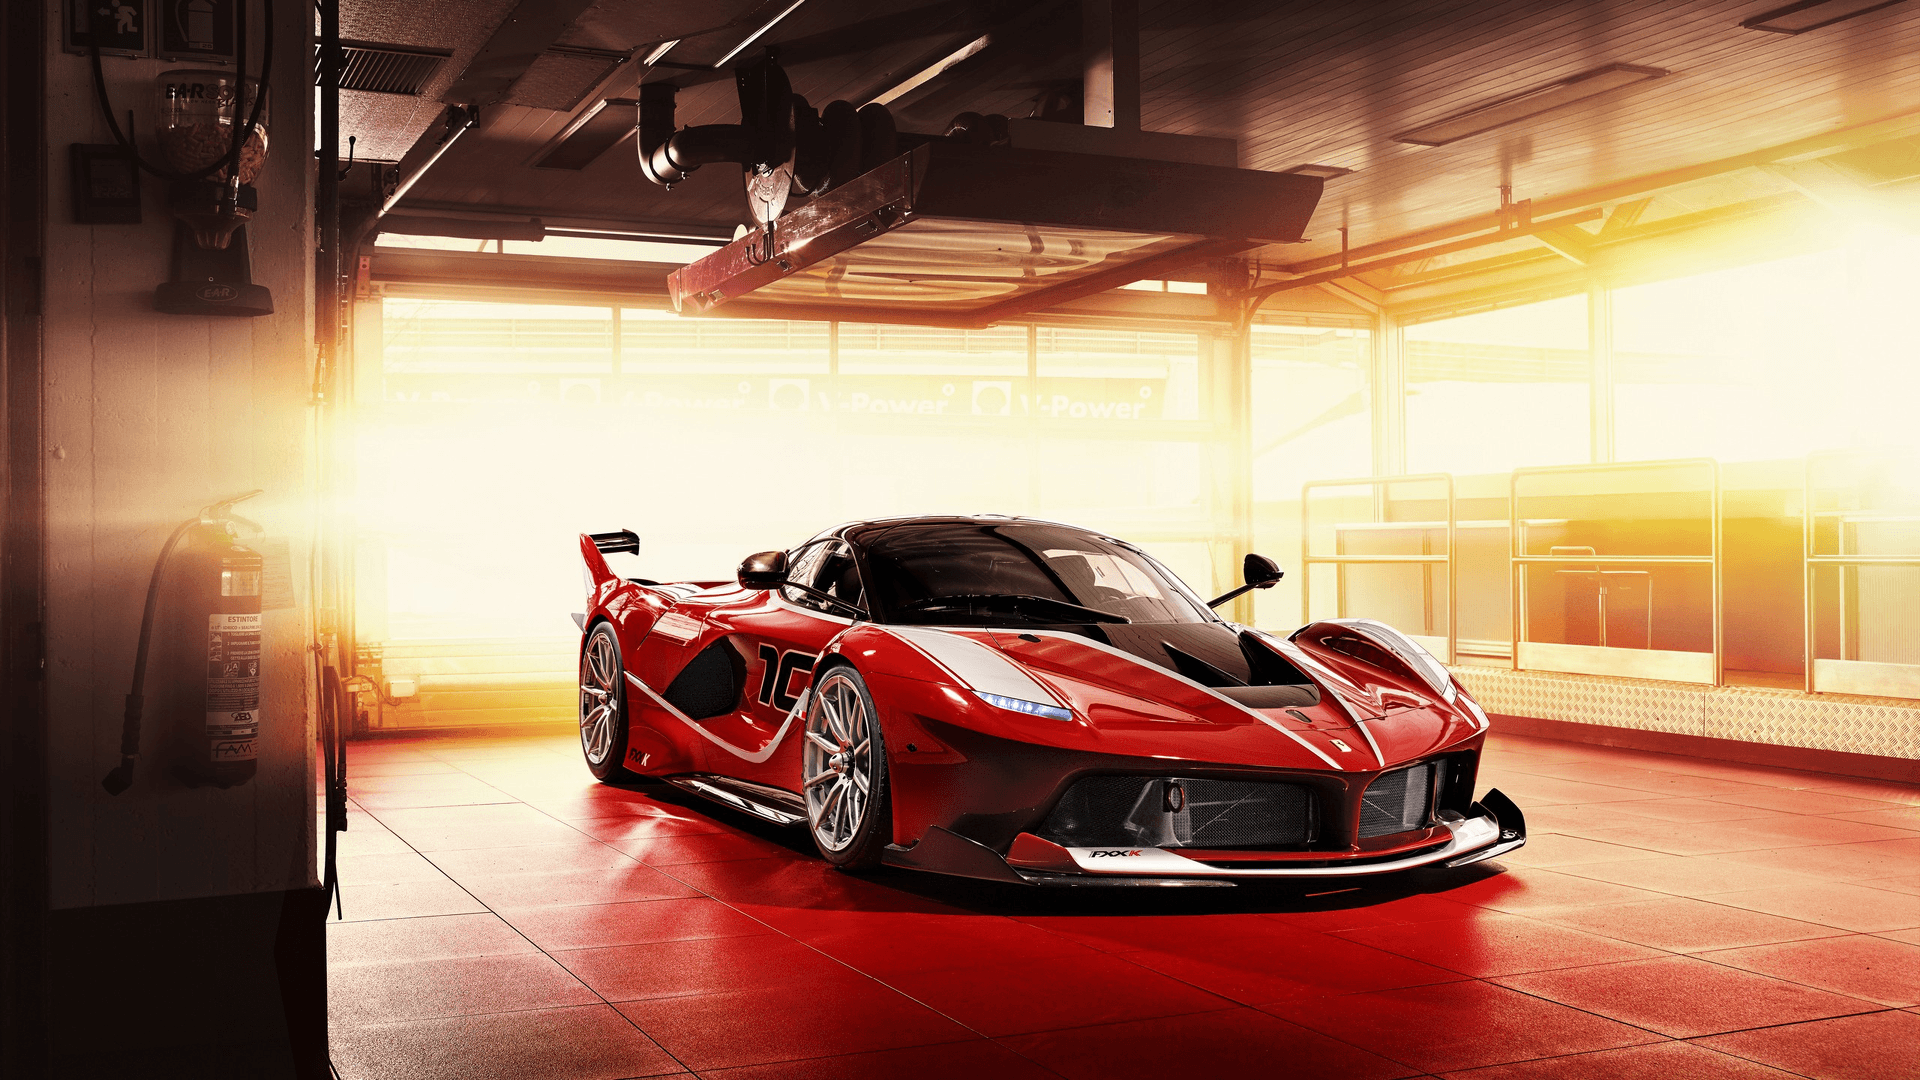 Brace Yourselves, Ferrari FXX K Evo To Debut This Weekend